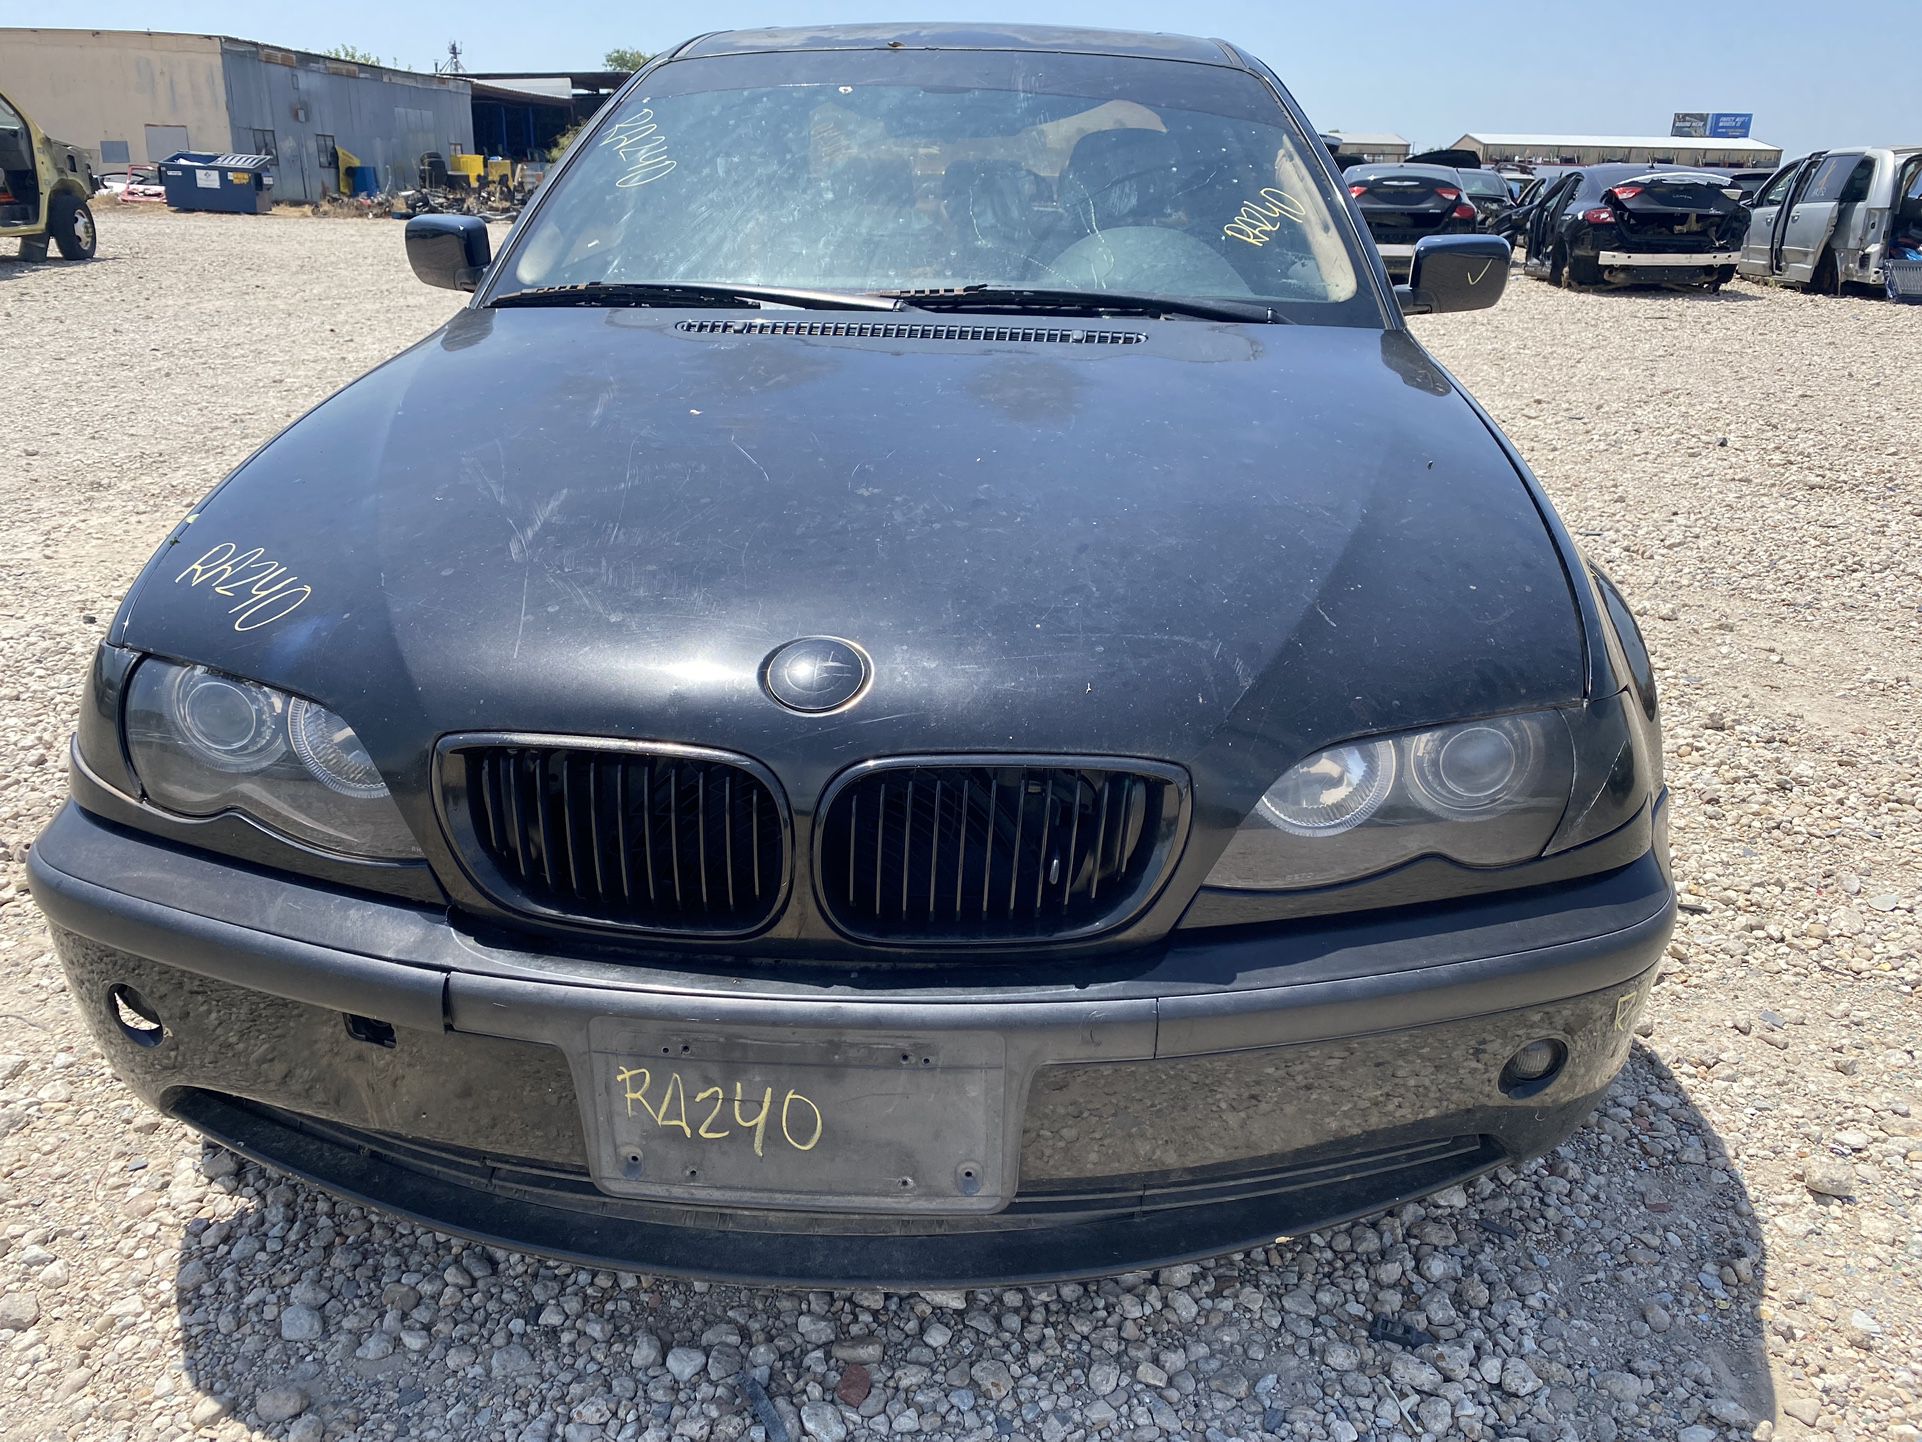 FOR PARTS SOLO PARTES 2005 BMW 325 good motor 2.5L / 325 525 body electric issues